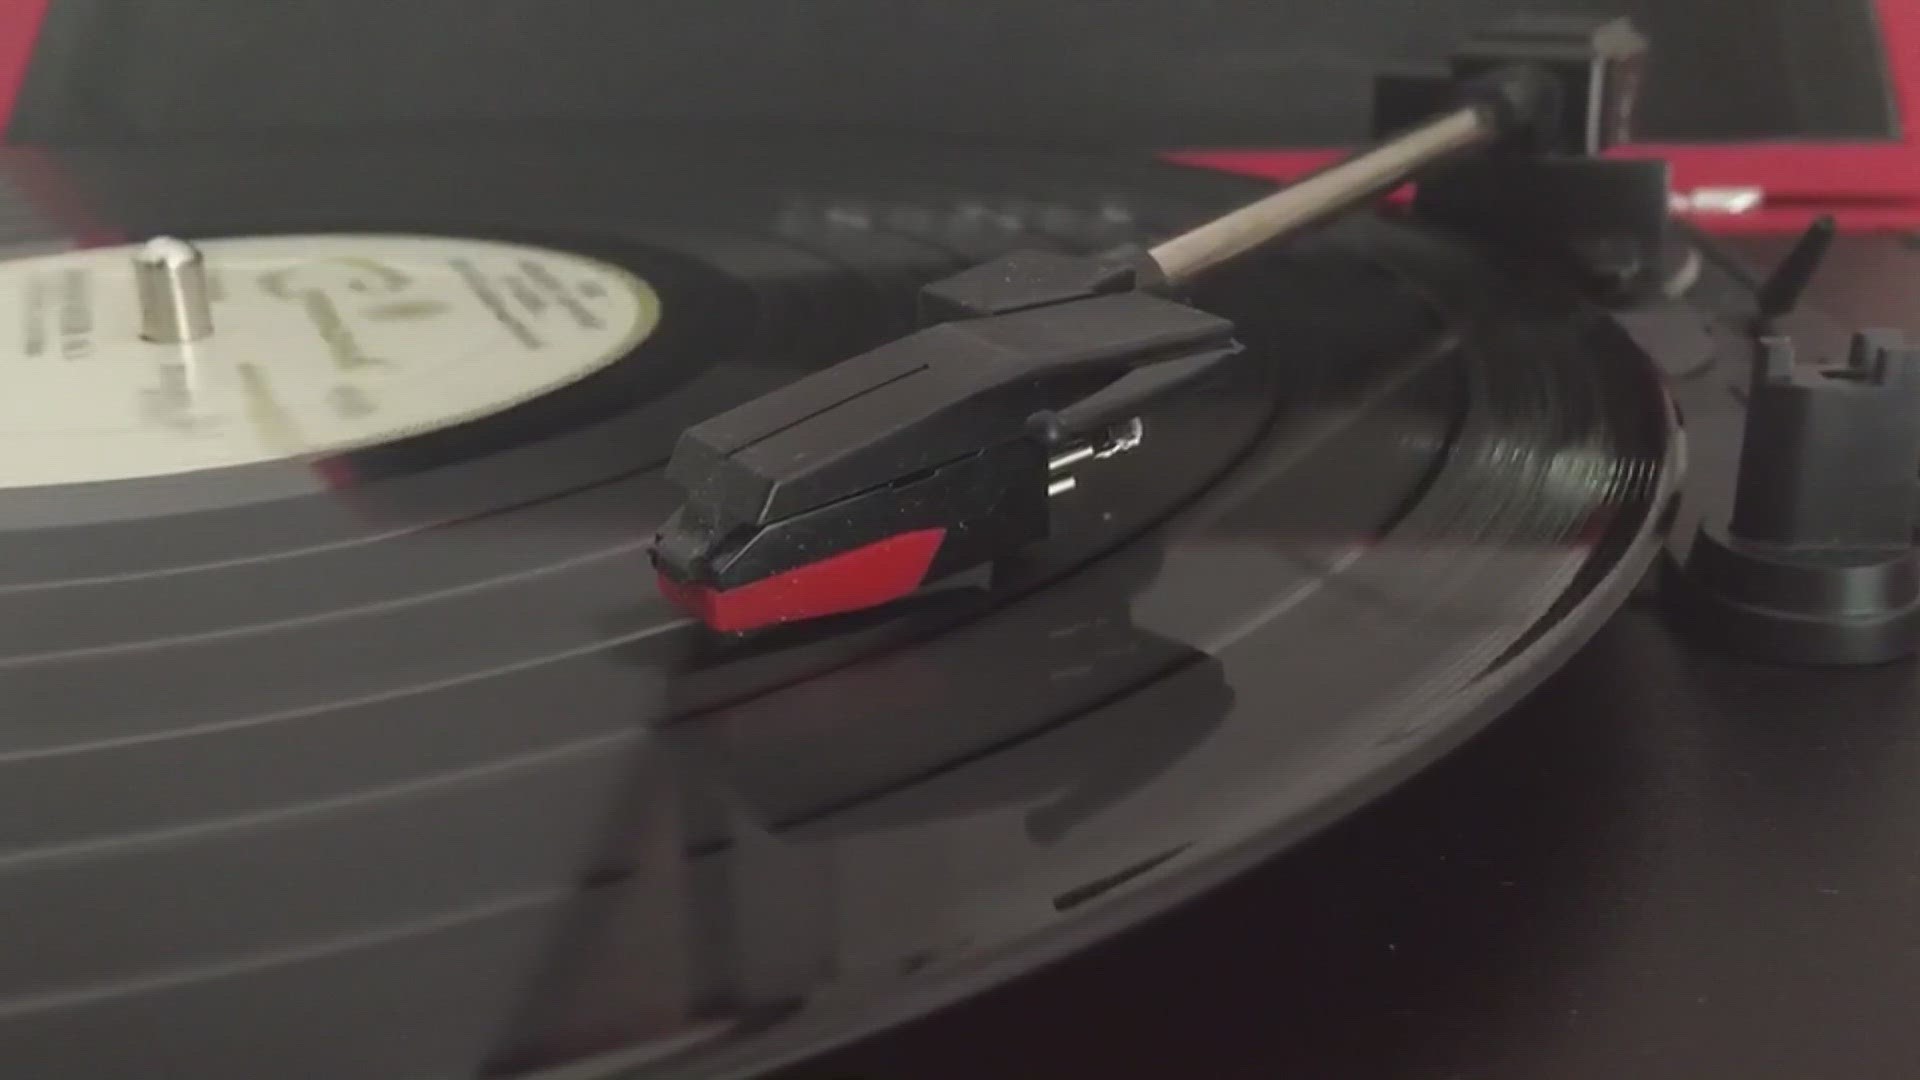 For the second year in a row, vinyl records have outsold CDs.